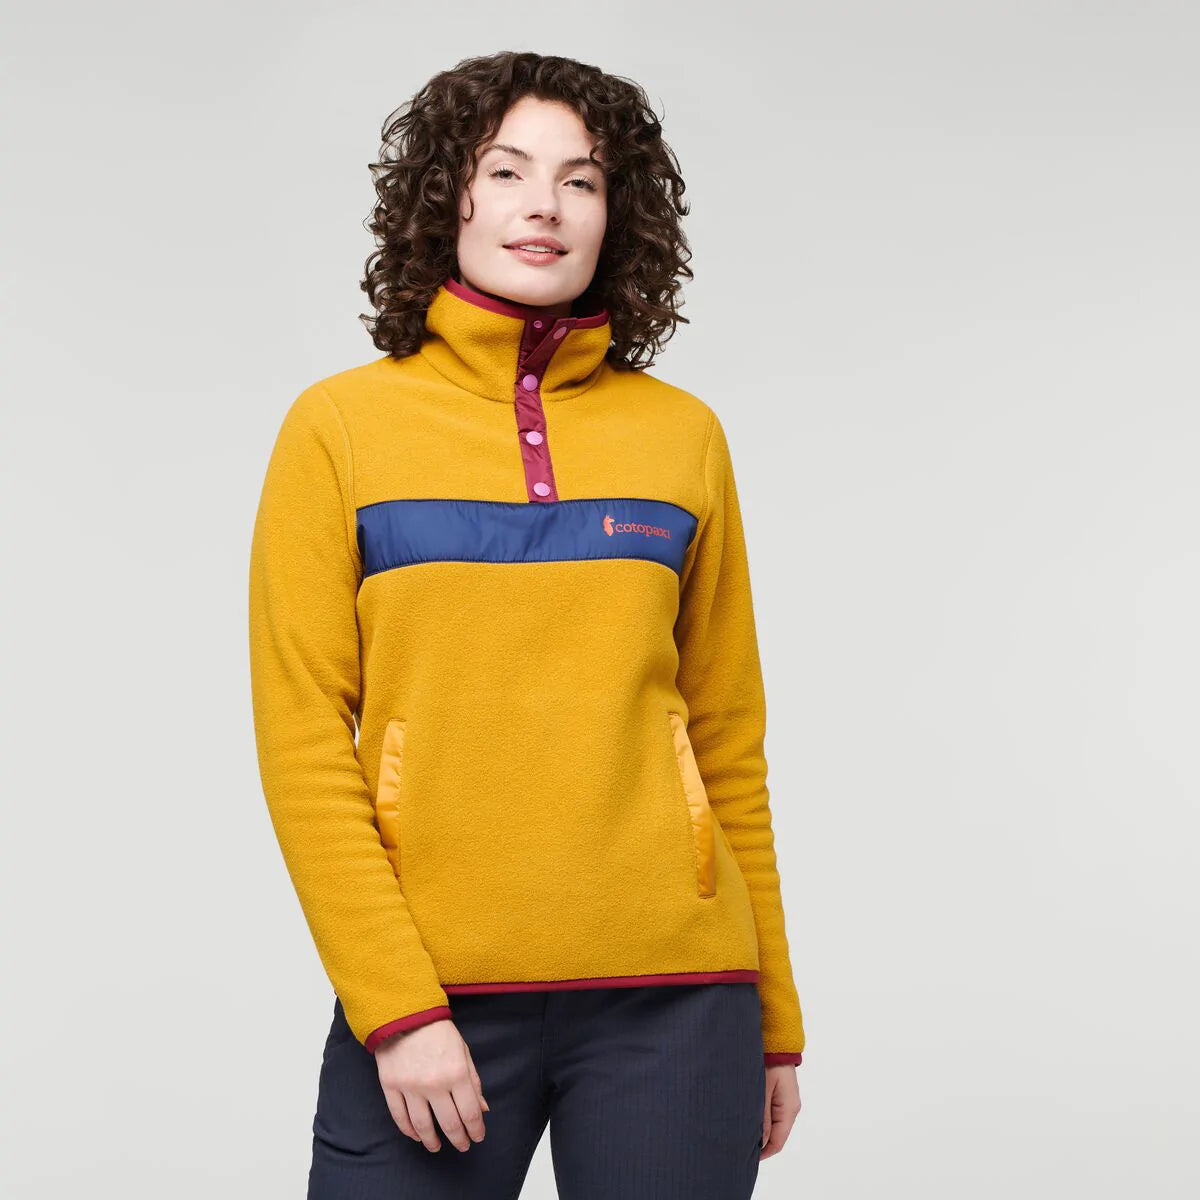 Cotopaxi W's Teca Fleece Pullover - Recycled polyester Honeycomb Shirt